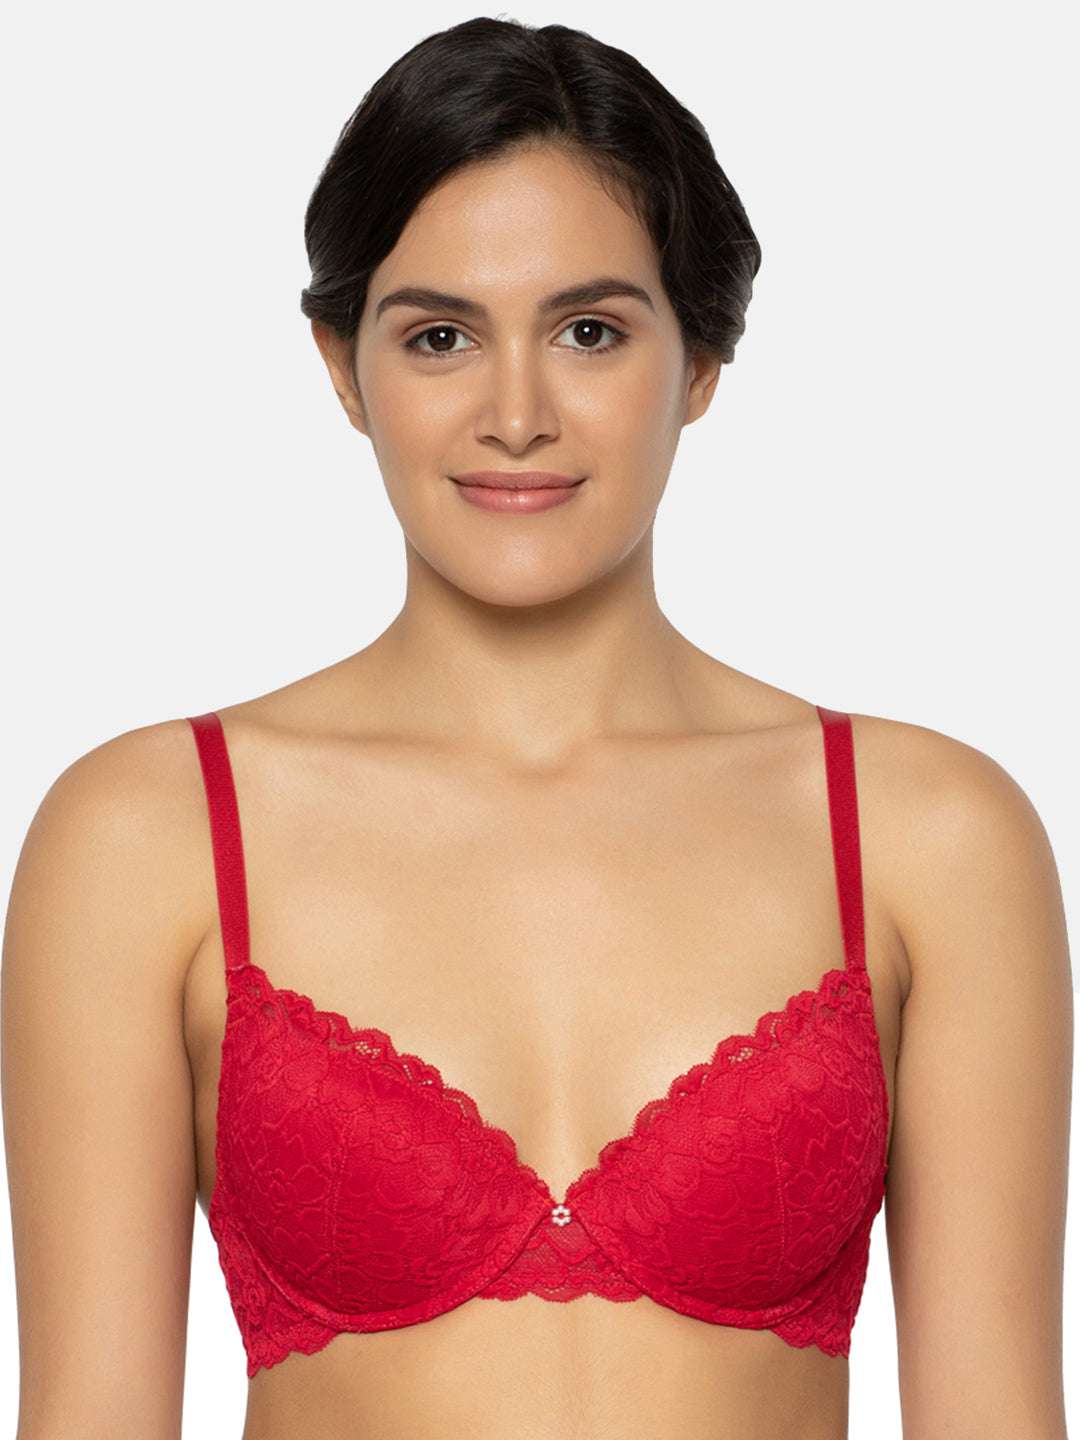 La Dearchuu Push Up Bras Lace Underwire Everyday Bras for Women India